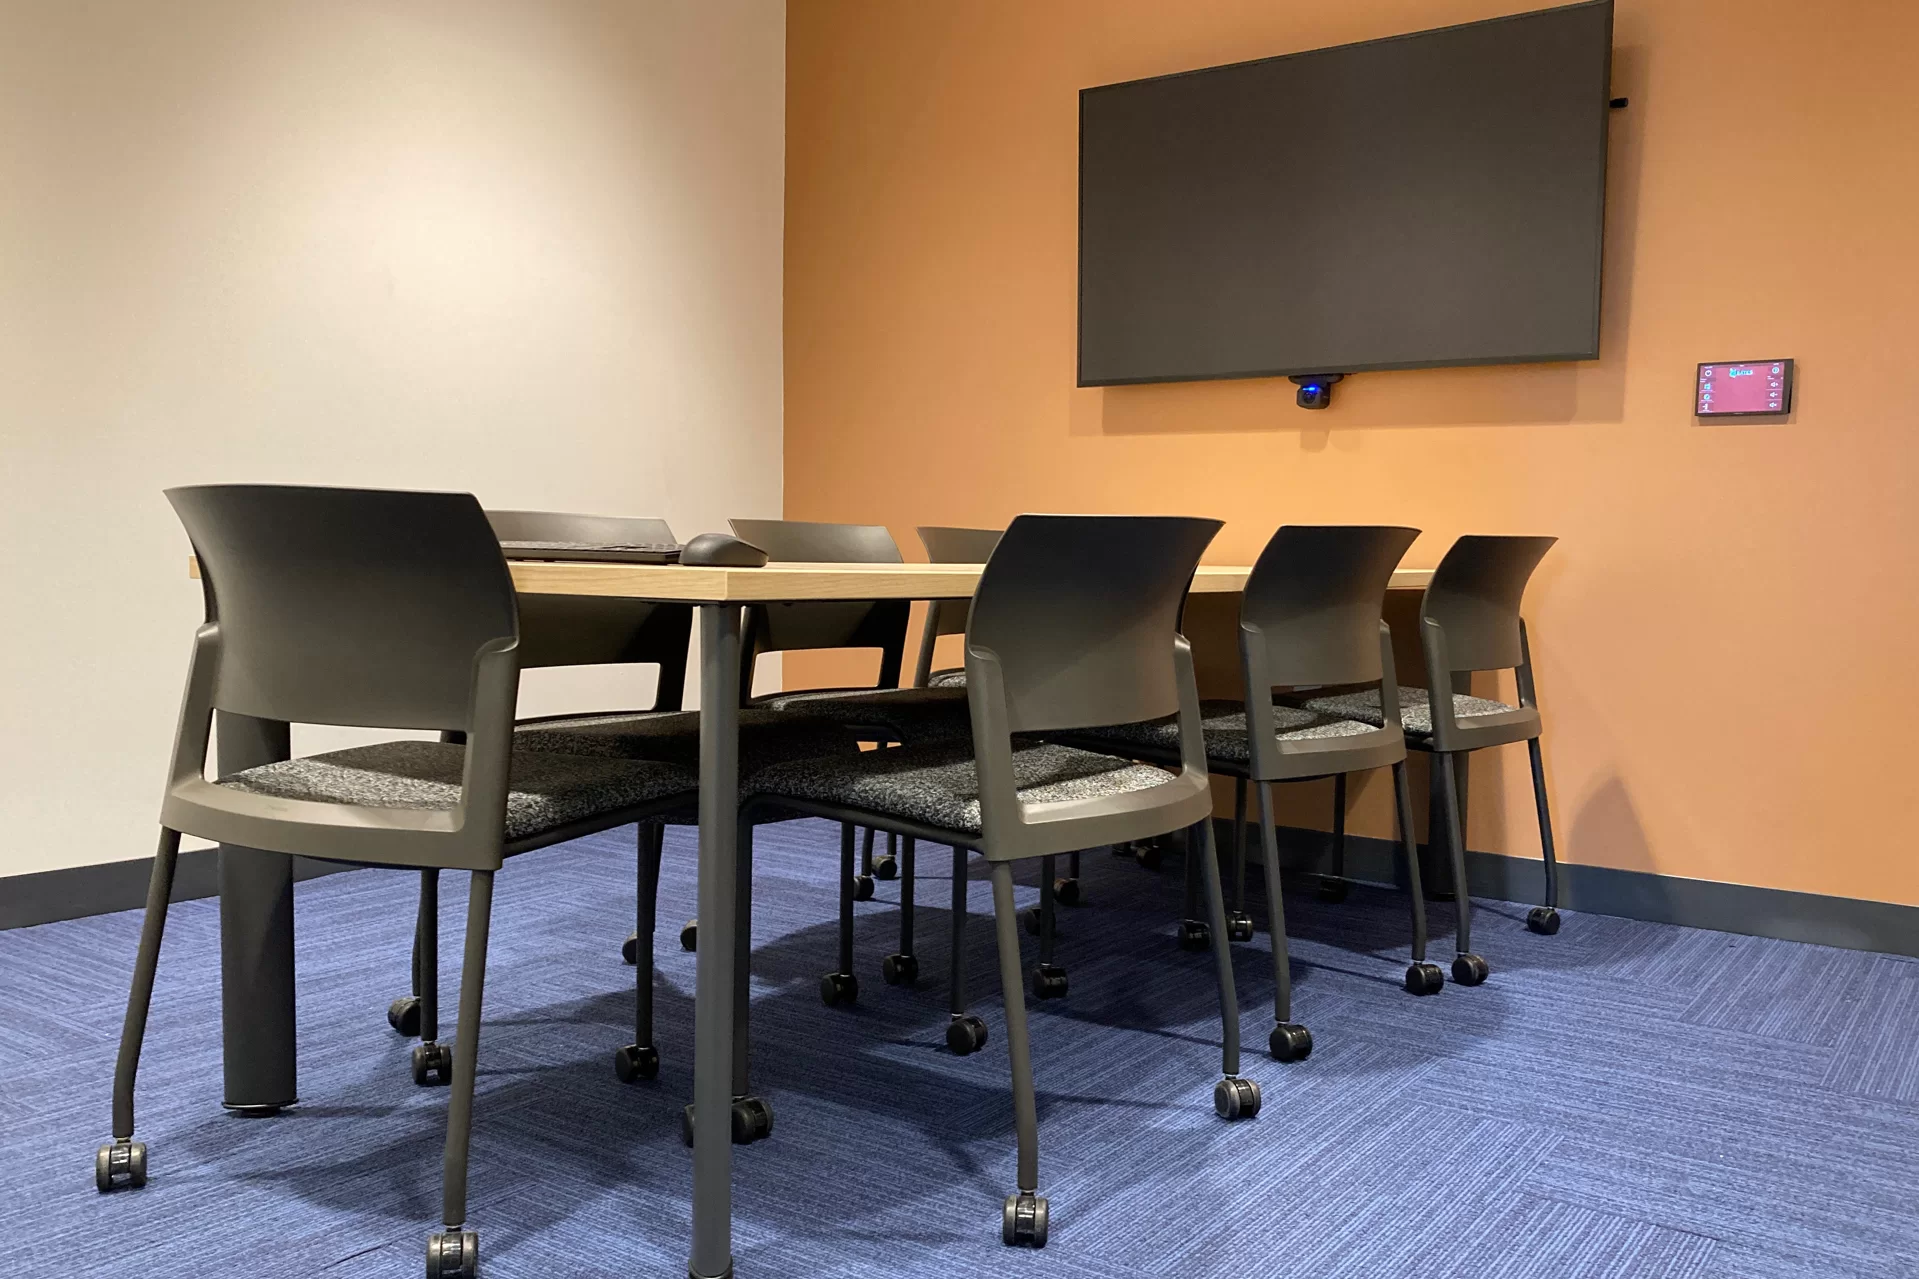 A Purposeful Work interview room on Chase Hall’s second floor. (Doug Hubley/Bates College)